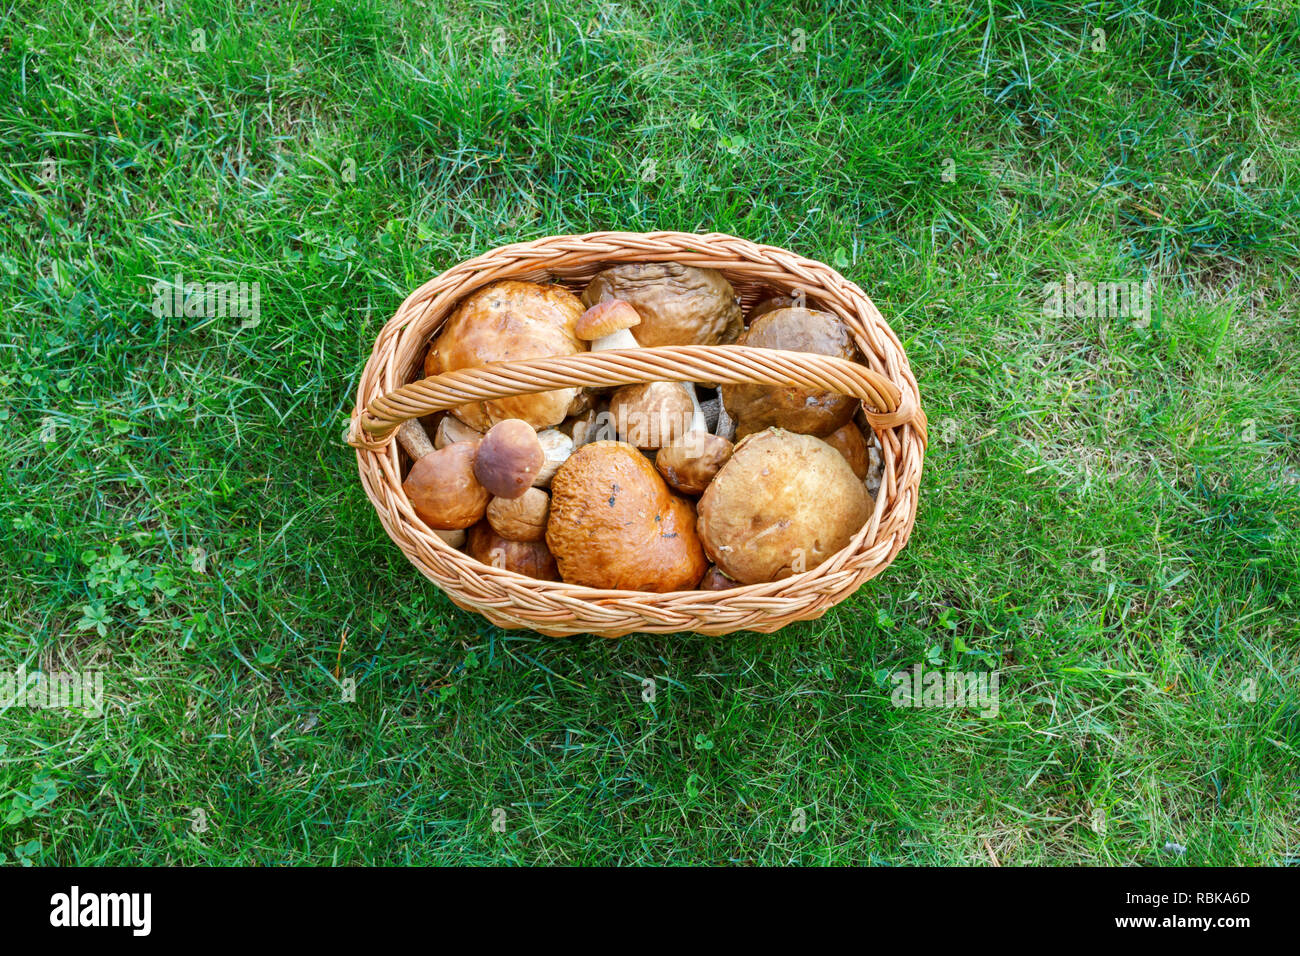 Mushrooms in a basket Stock Photo